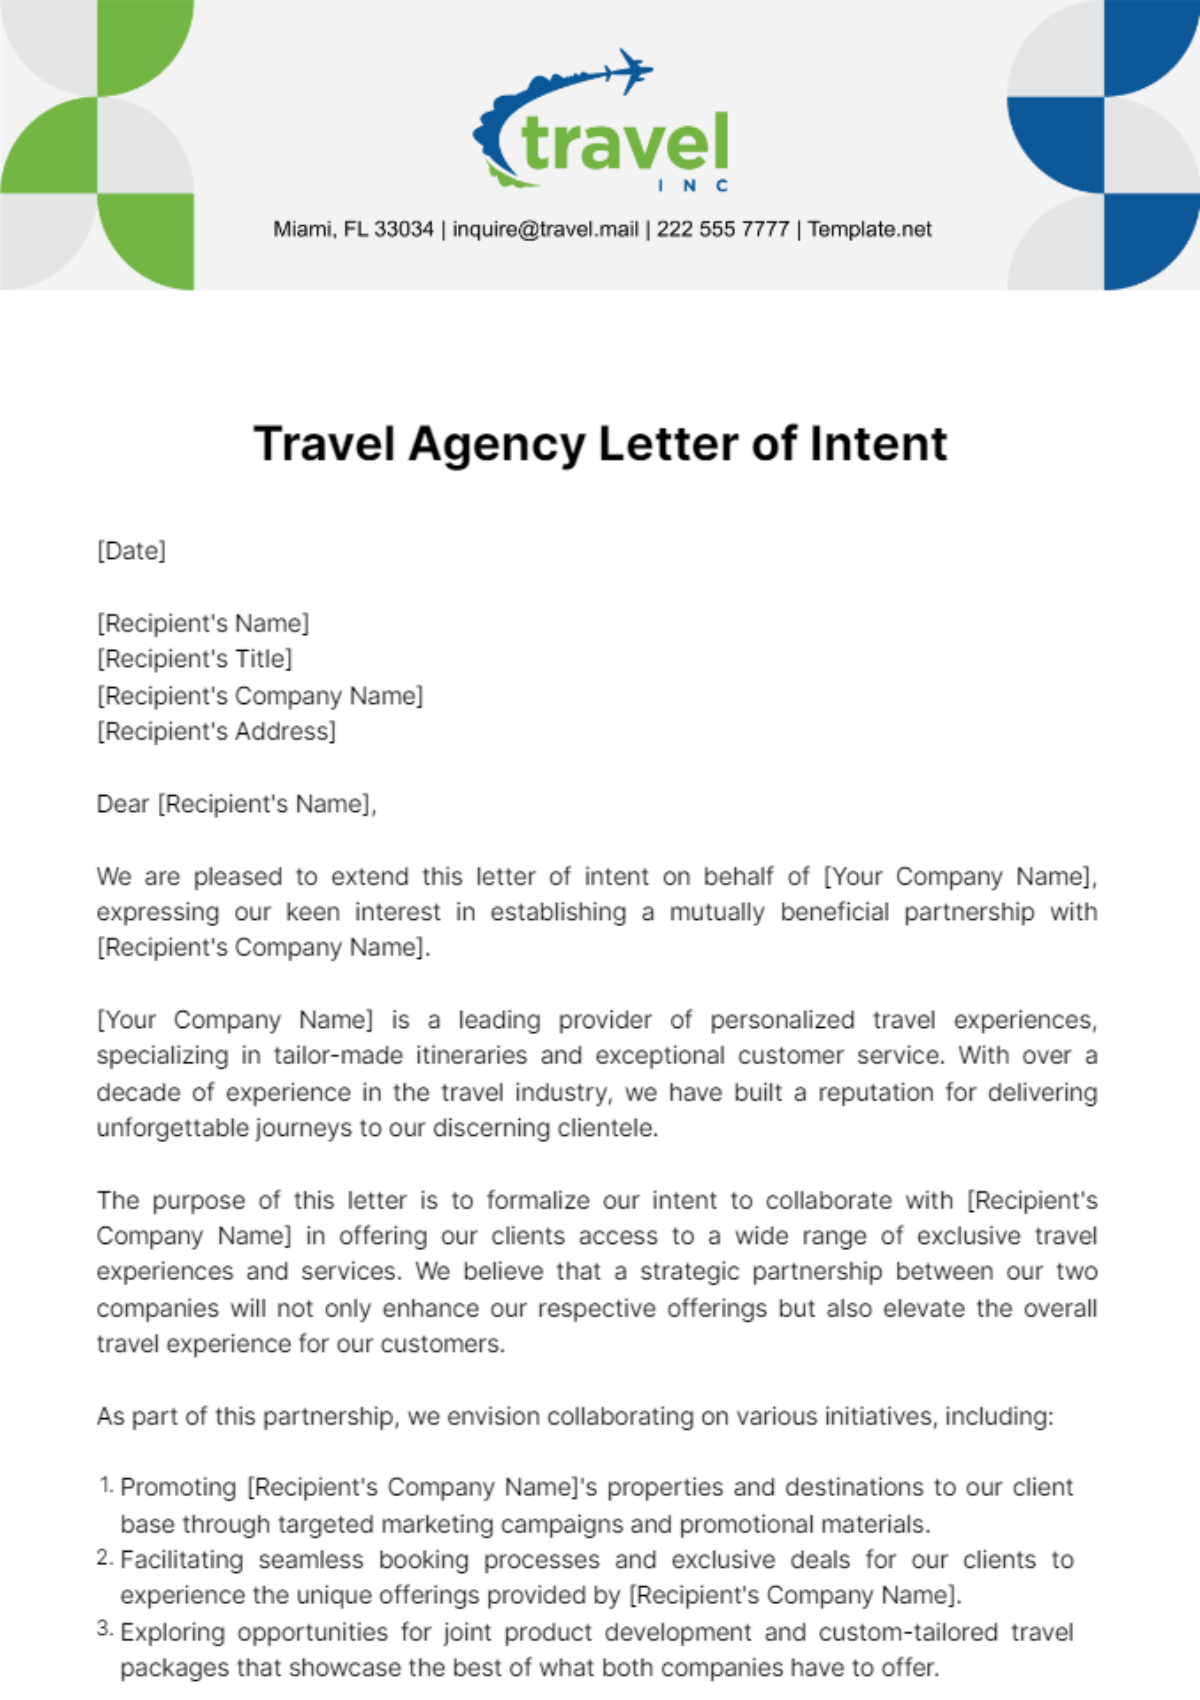 Travel Agency Letter of Intent Template